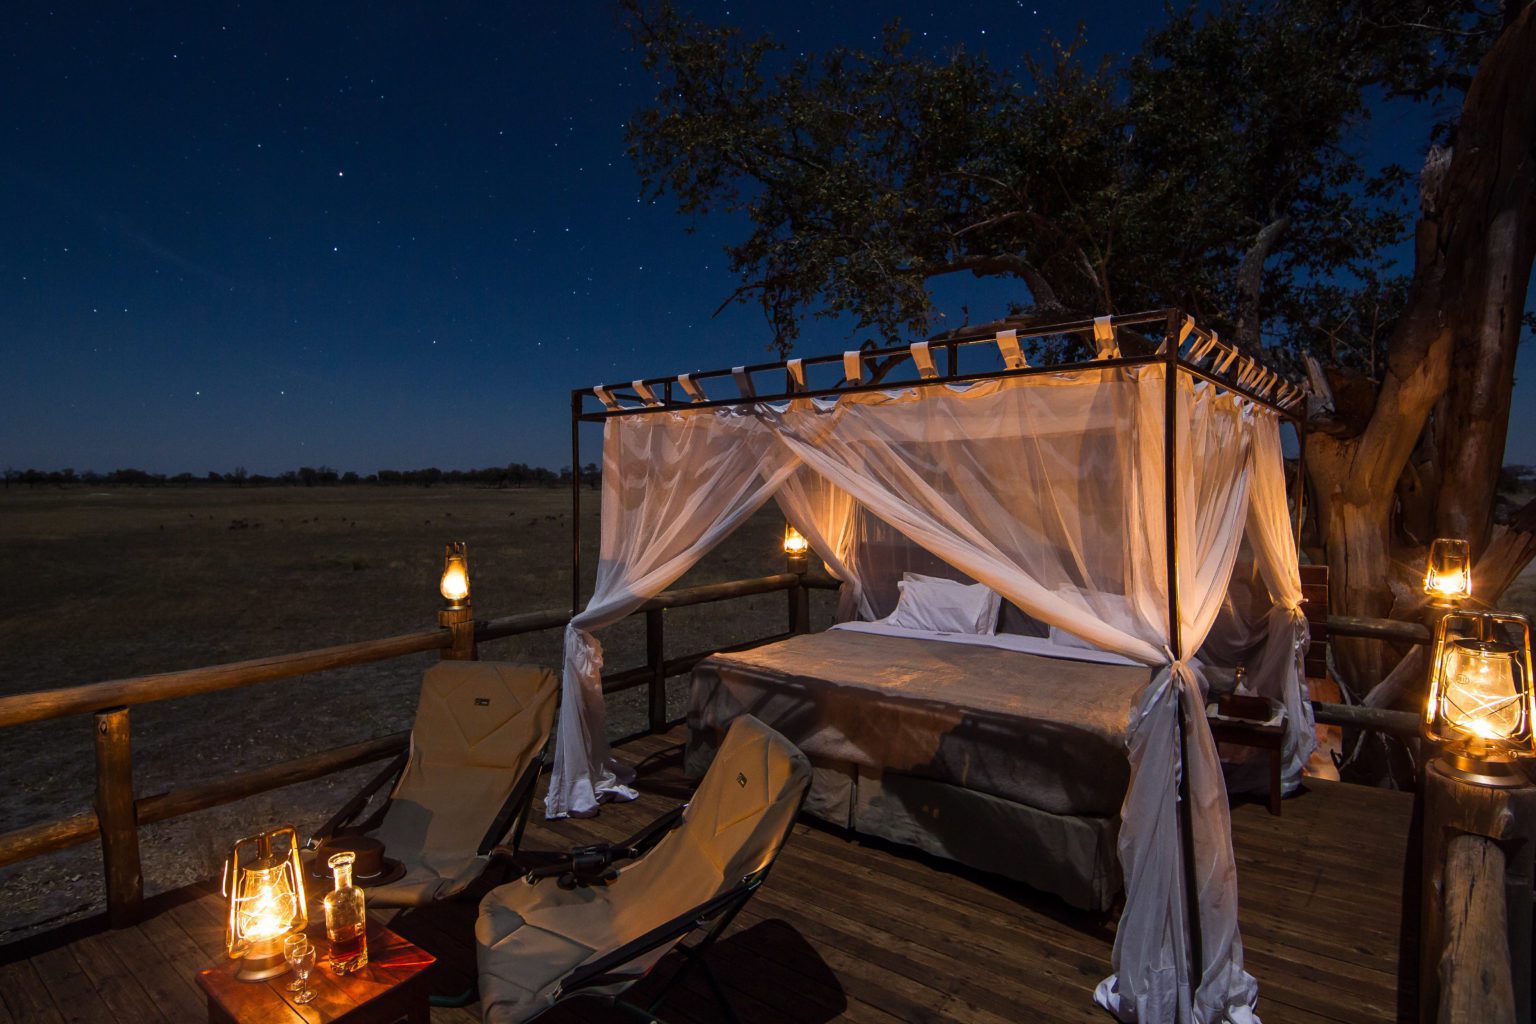 Kanana Camp fly camping on the star deck seen on our Botswana safari